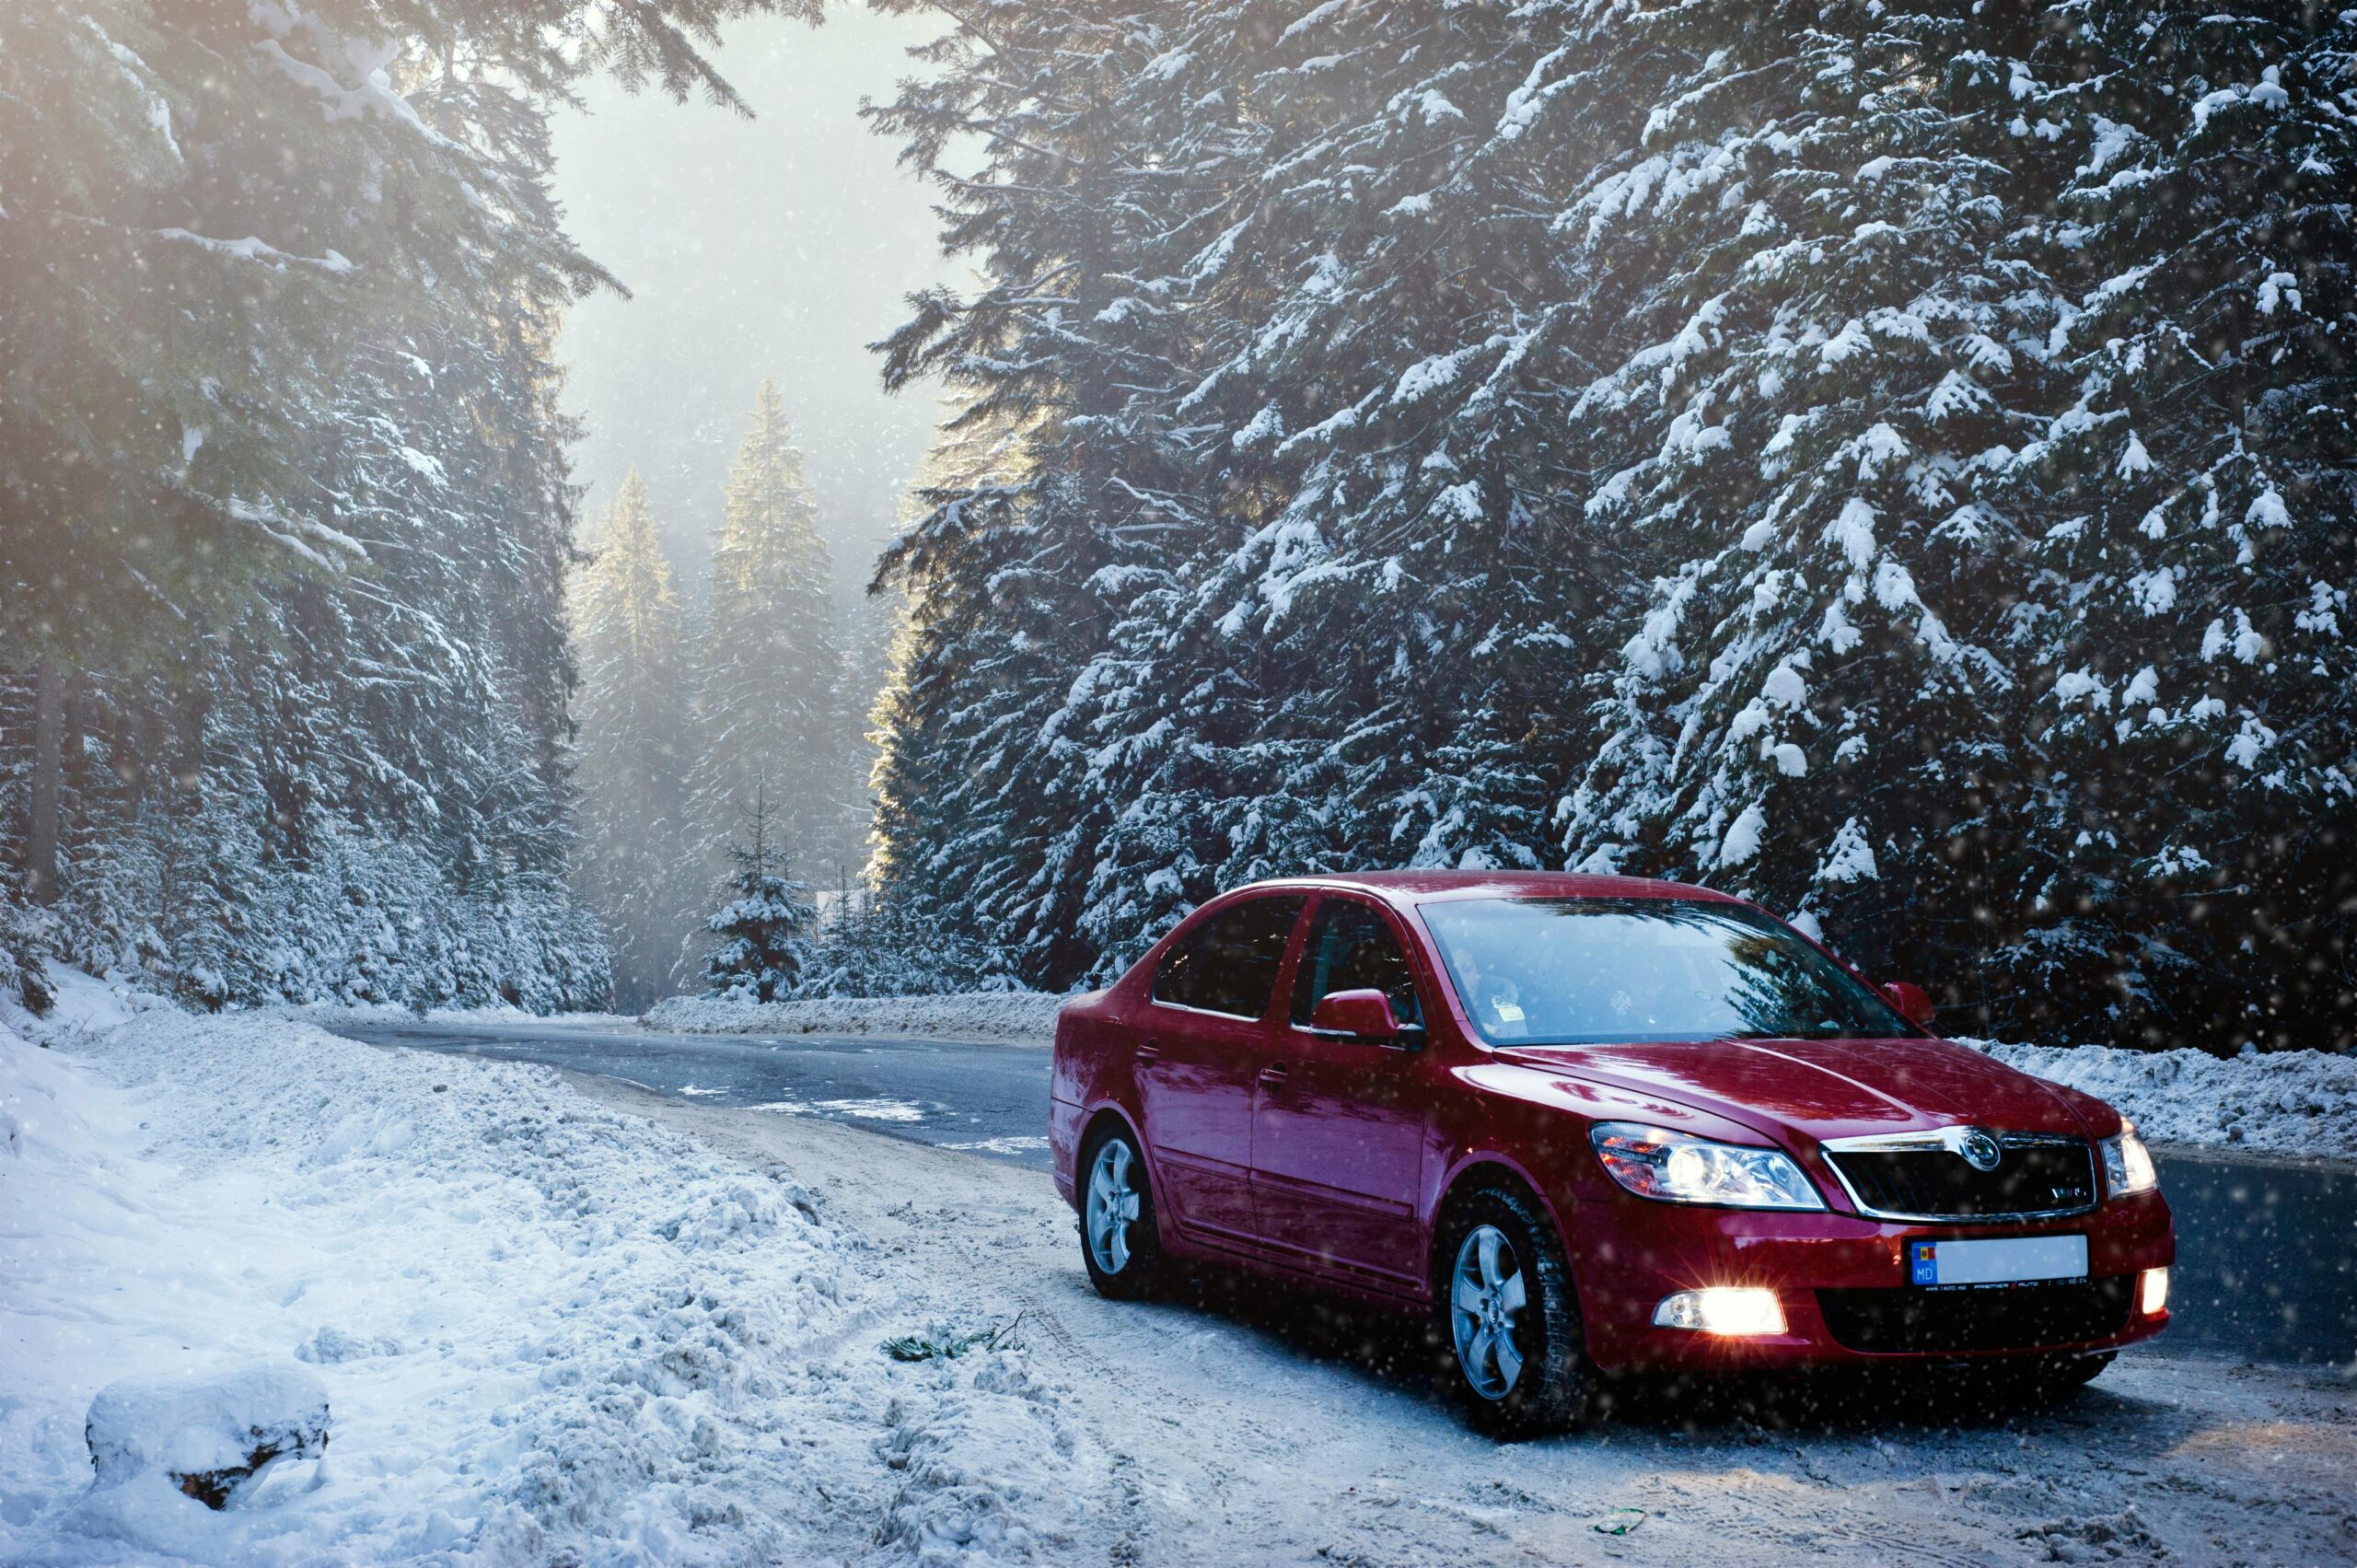 The Ultimate Guide to Preparing Your Car for Winter Driving